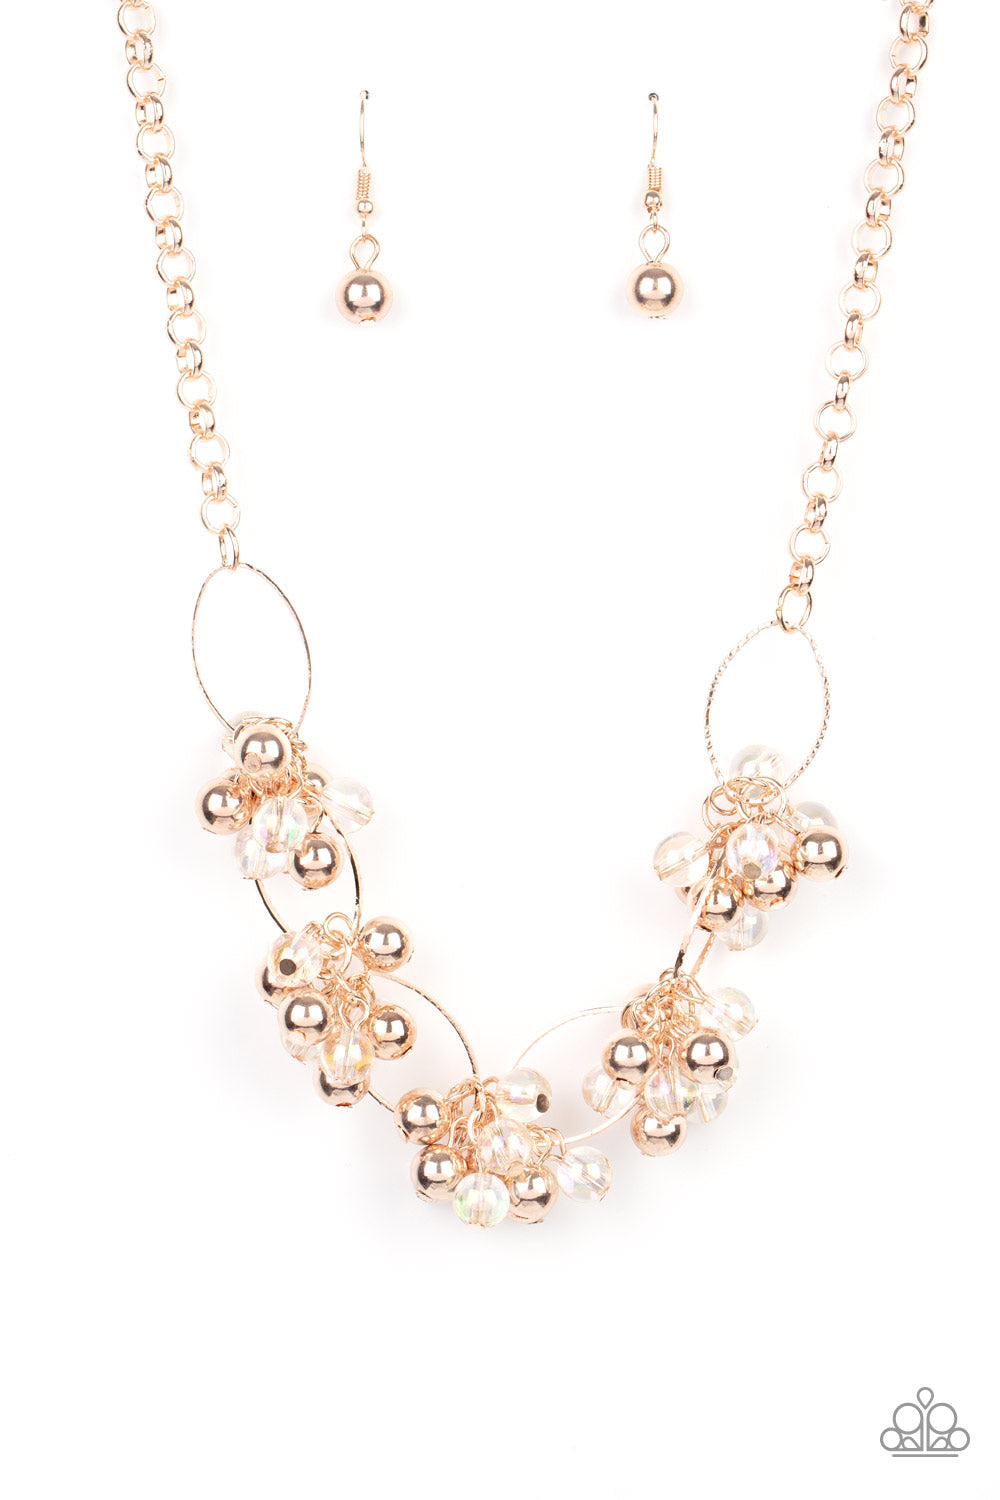 Effervescent Ensemble - Rose Gold and Iridescent Necklace - Paparazzi Accessories - Clusters of glassy iridescent and shiny rose gold beads link with textured rose gold ovals, creating a bubbly effervescence below the collar. Features an adjustable clasp closure. Sold as one individual necklace. Includes one pair of matching earrings.